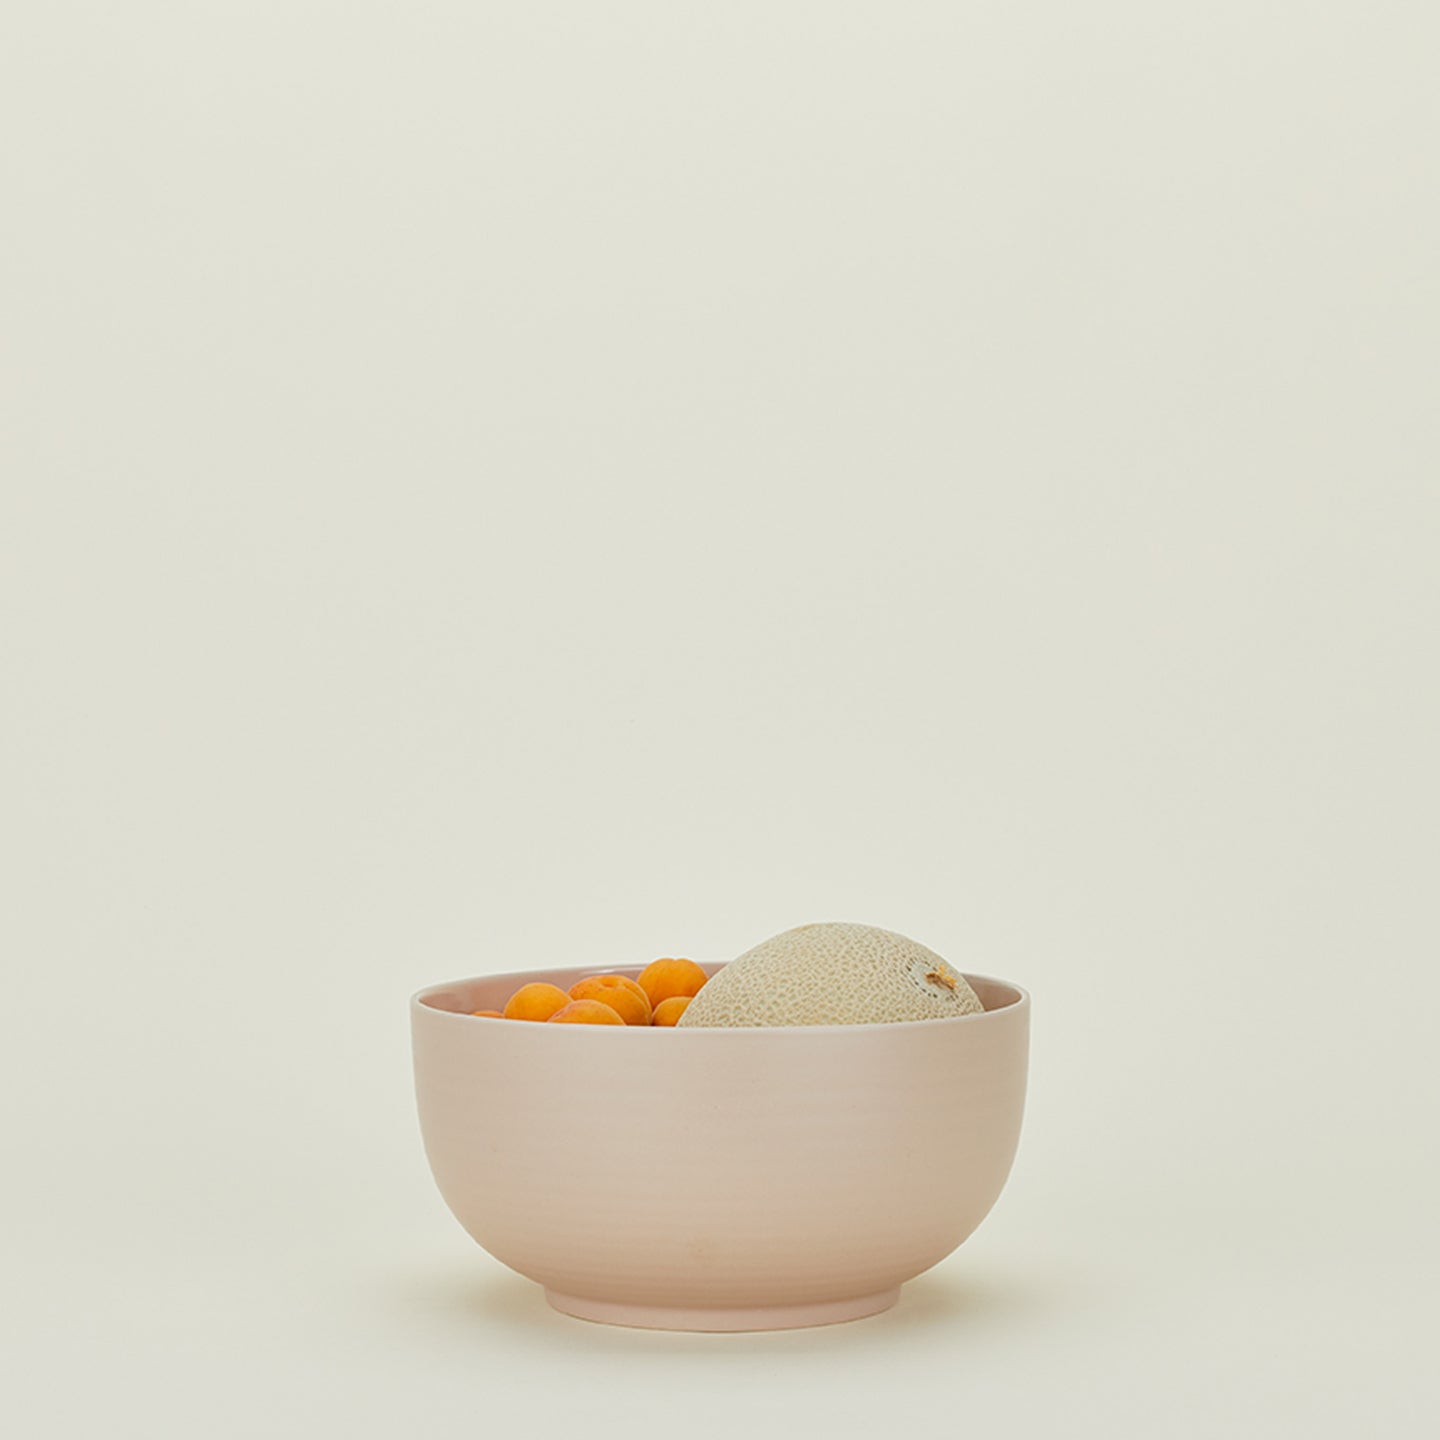 Minimalist still life featuring pink bowl with apricots and cantaloupe.